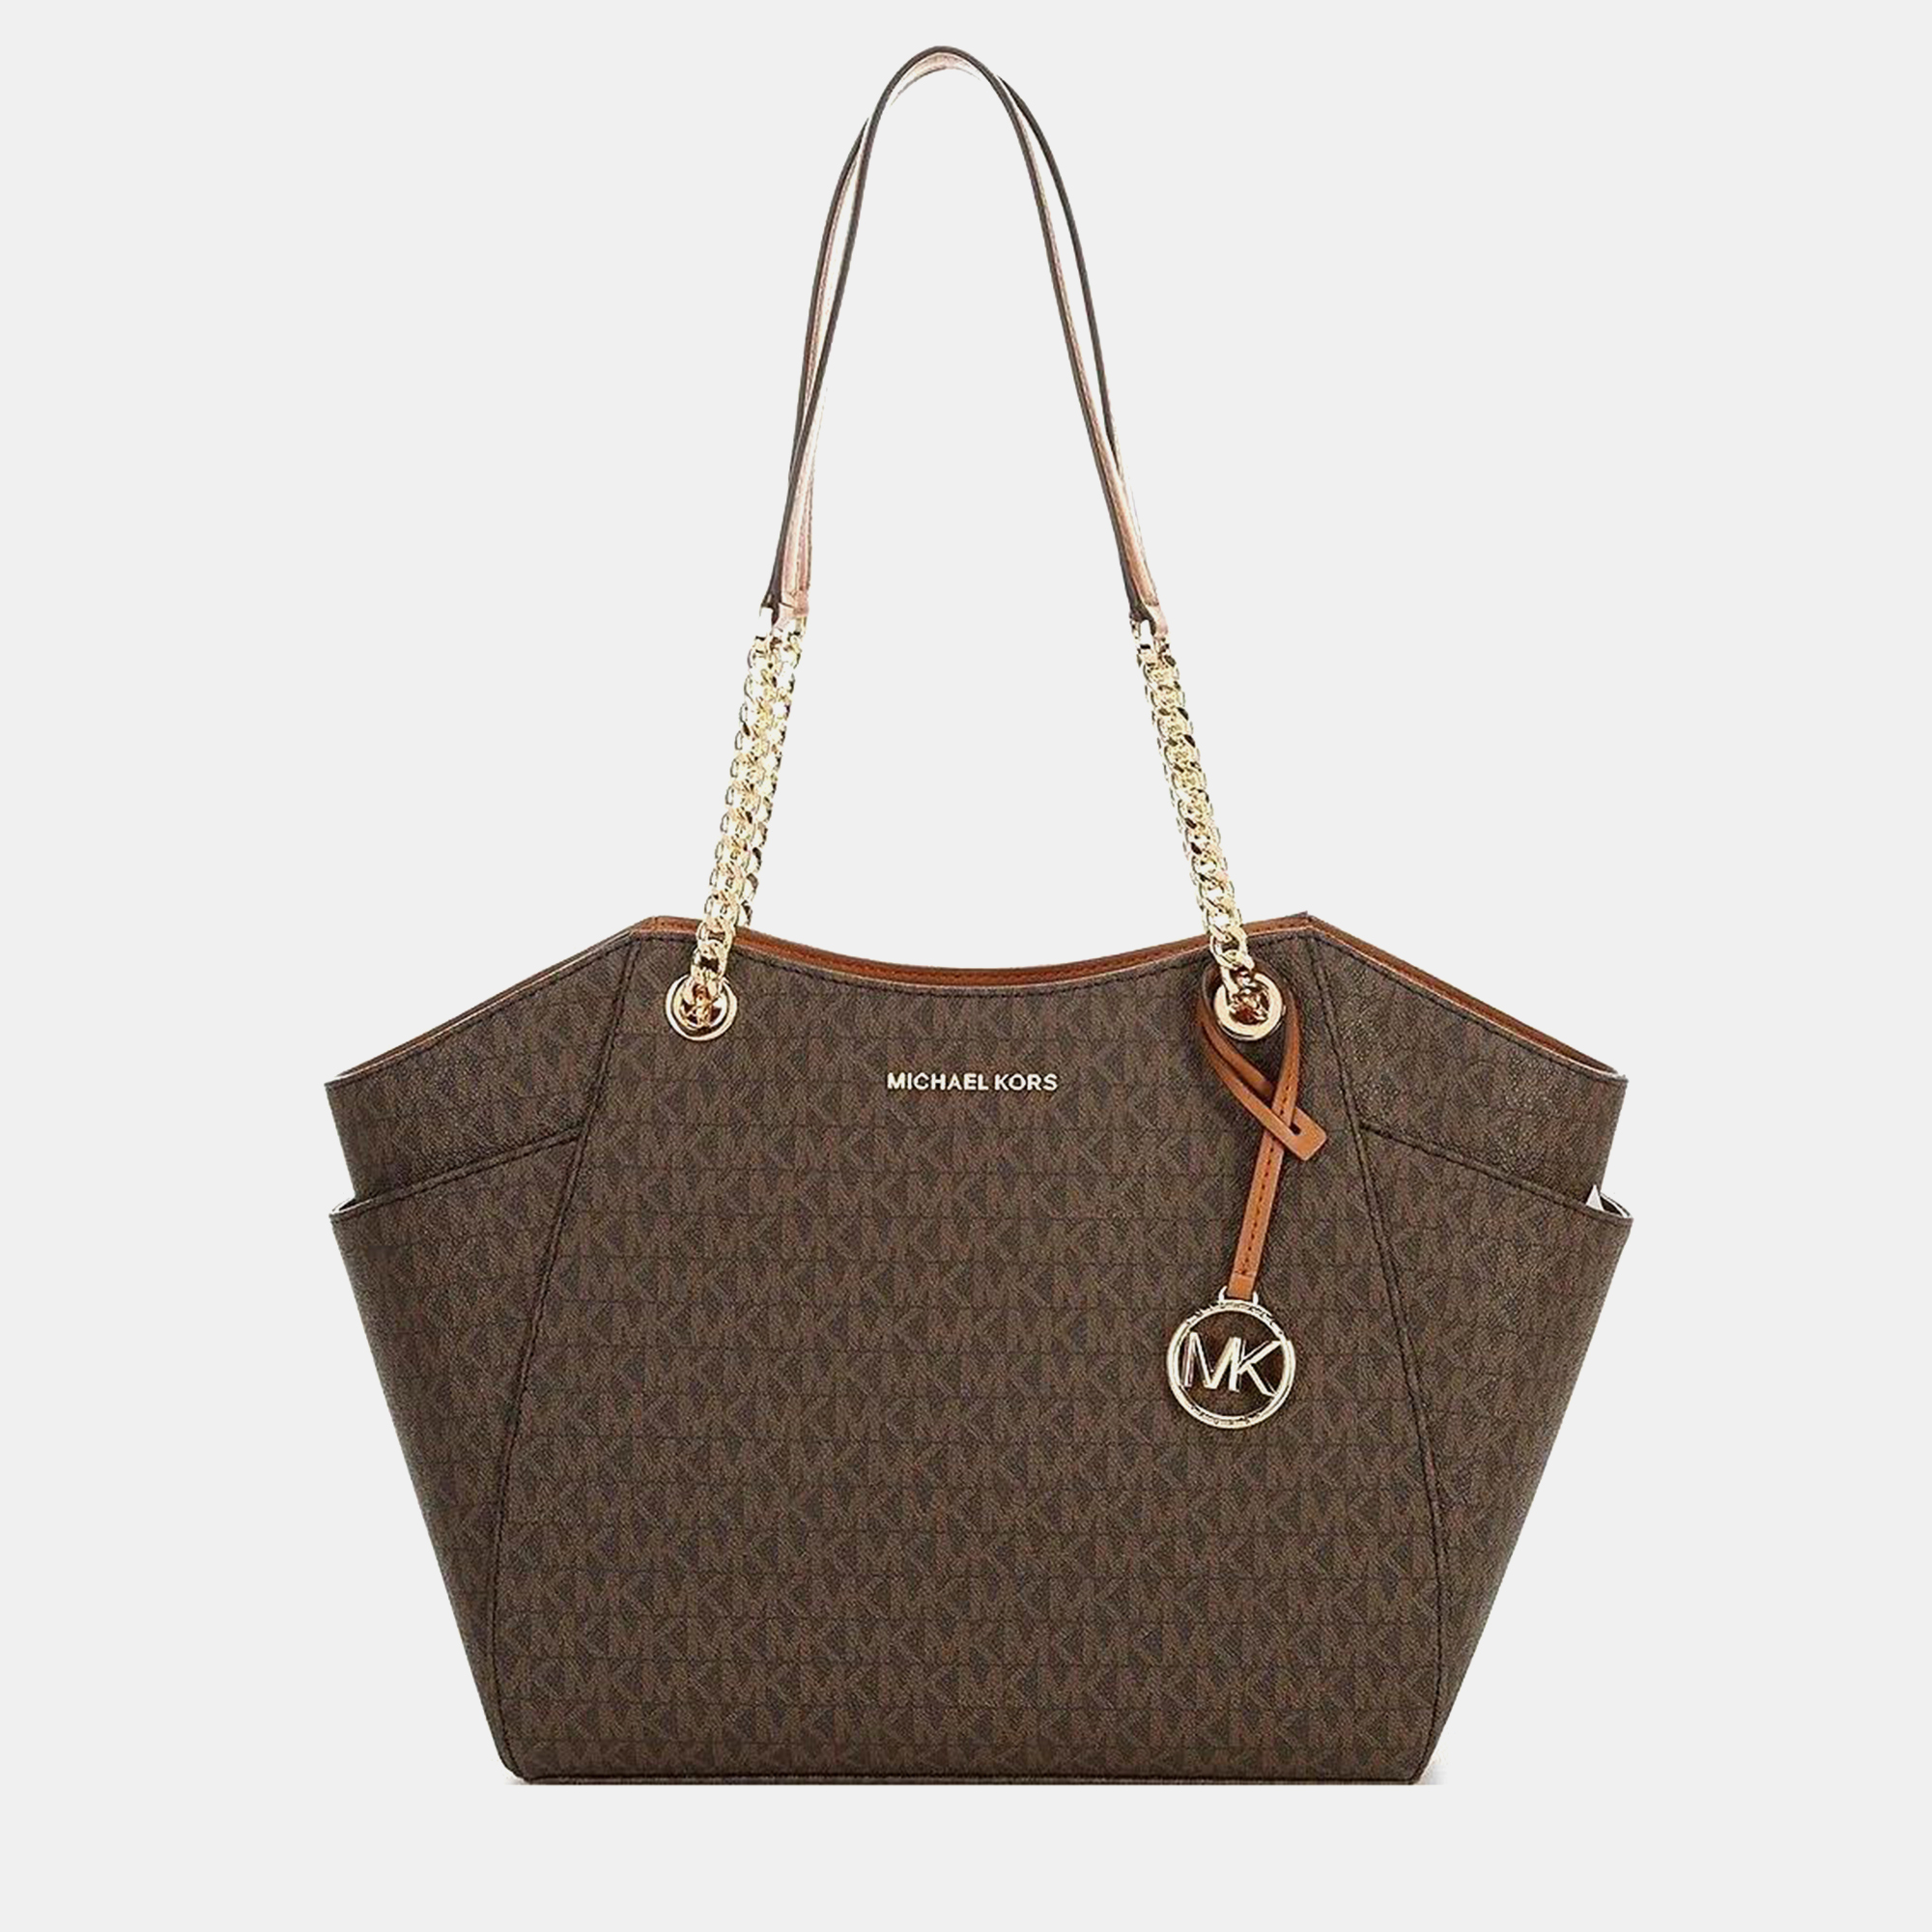 Michael kors brown signature and leather jet tote bag